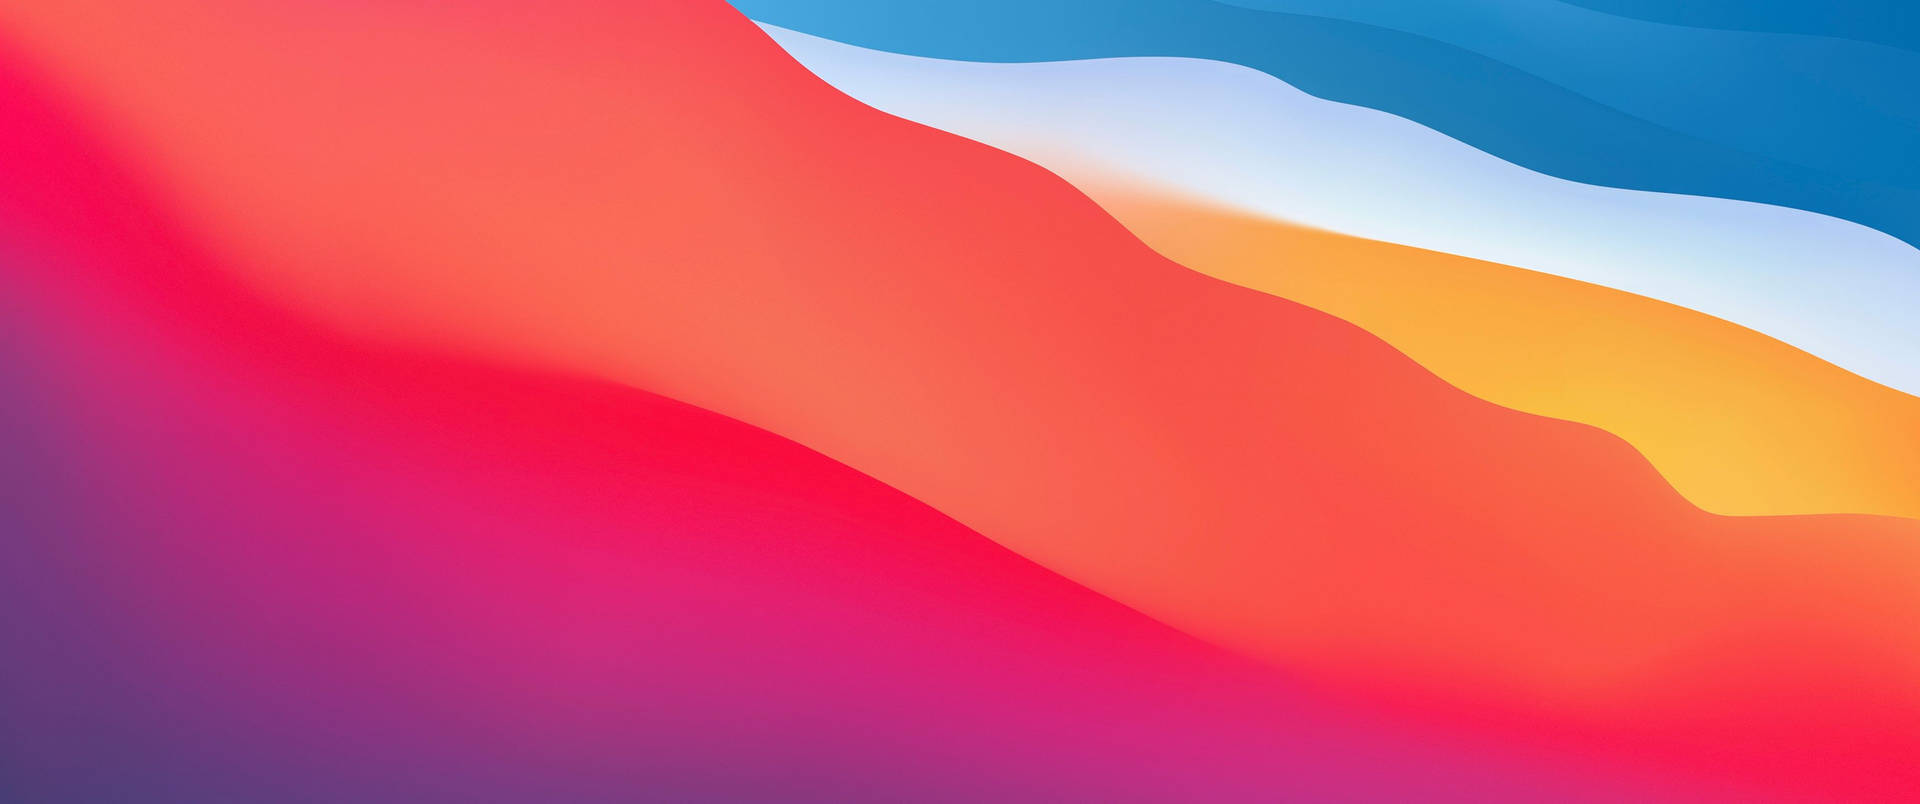 3440x1440 Minimalist Abstract Color Waves Wallpaper